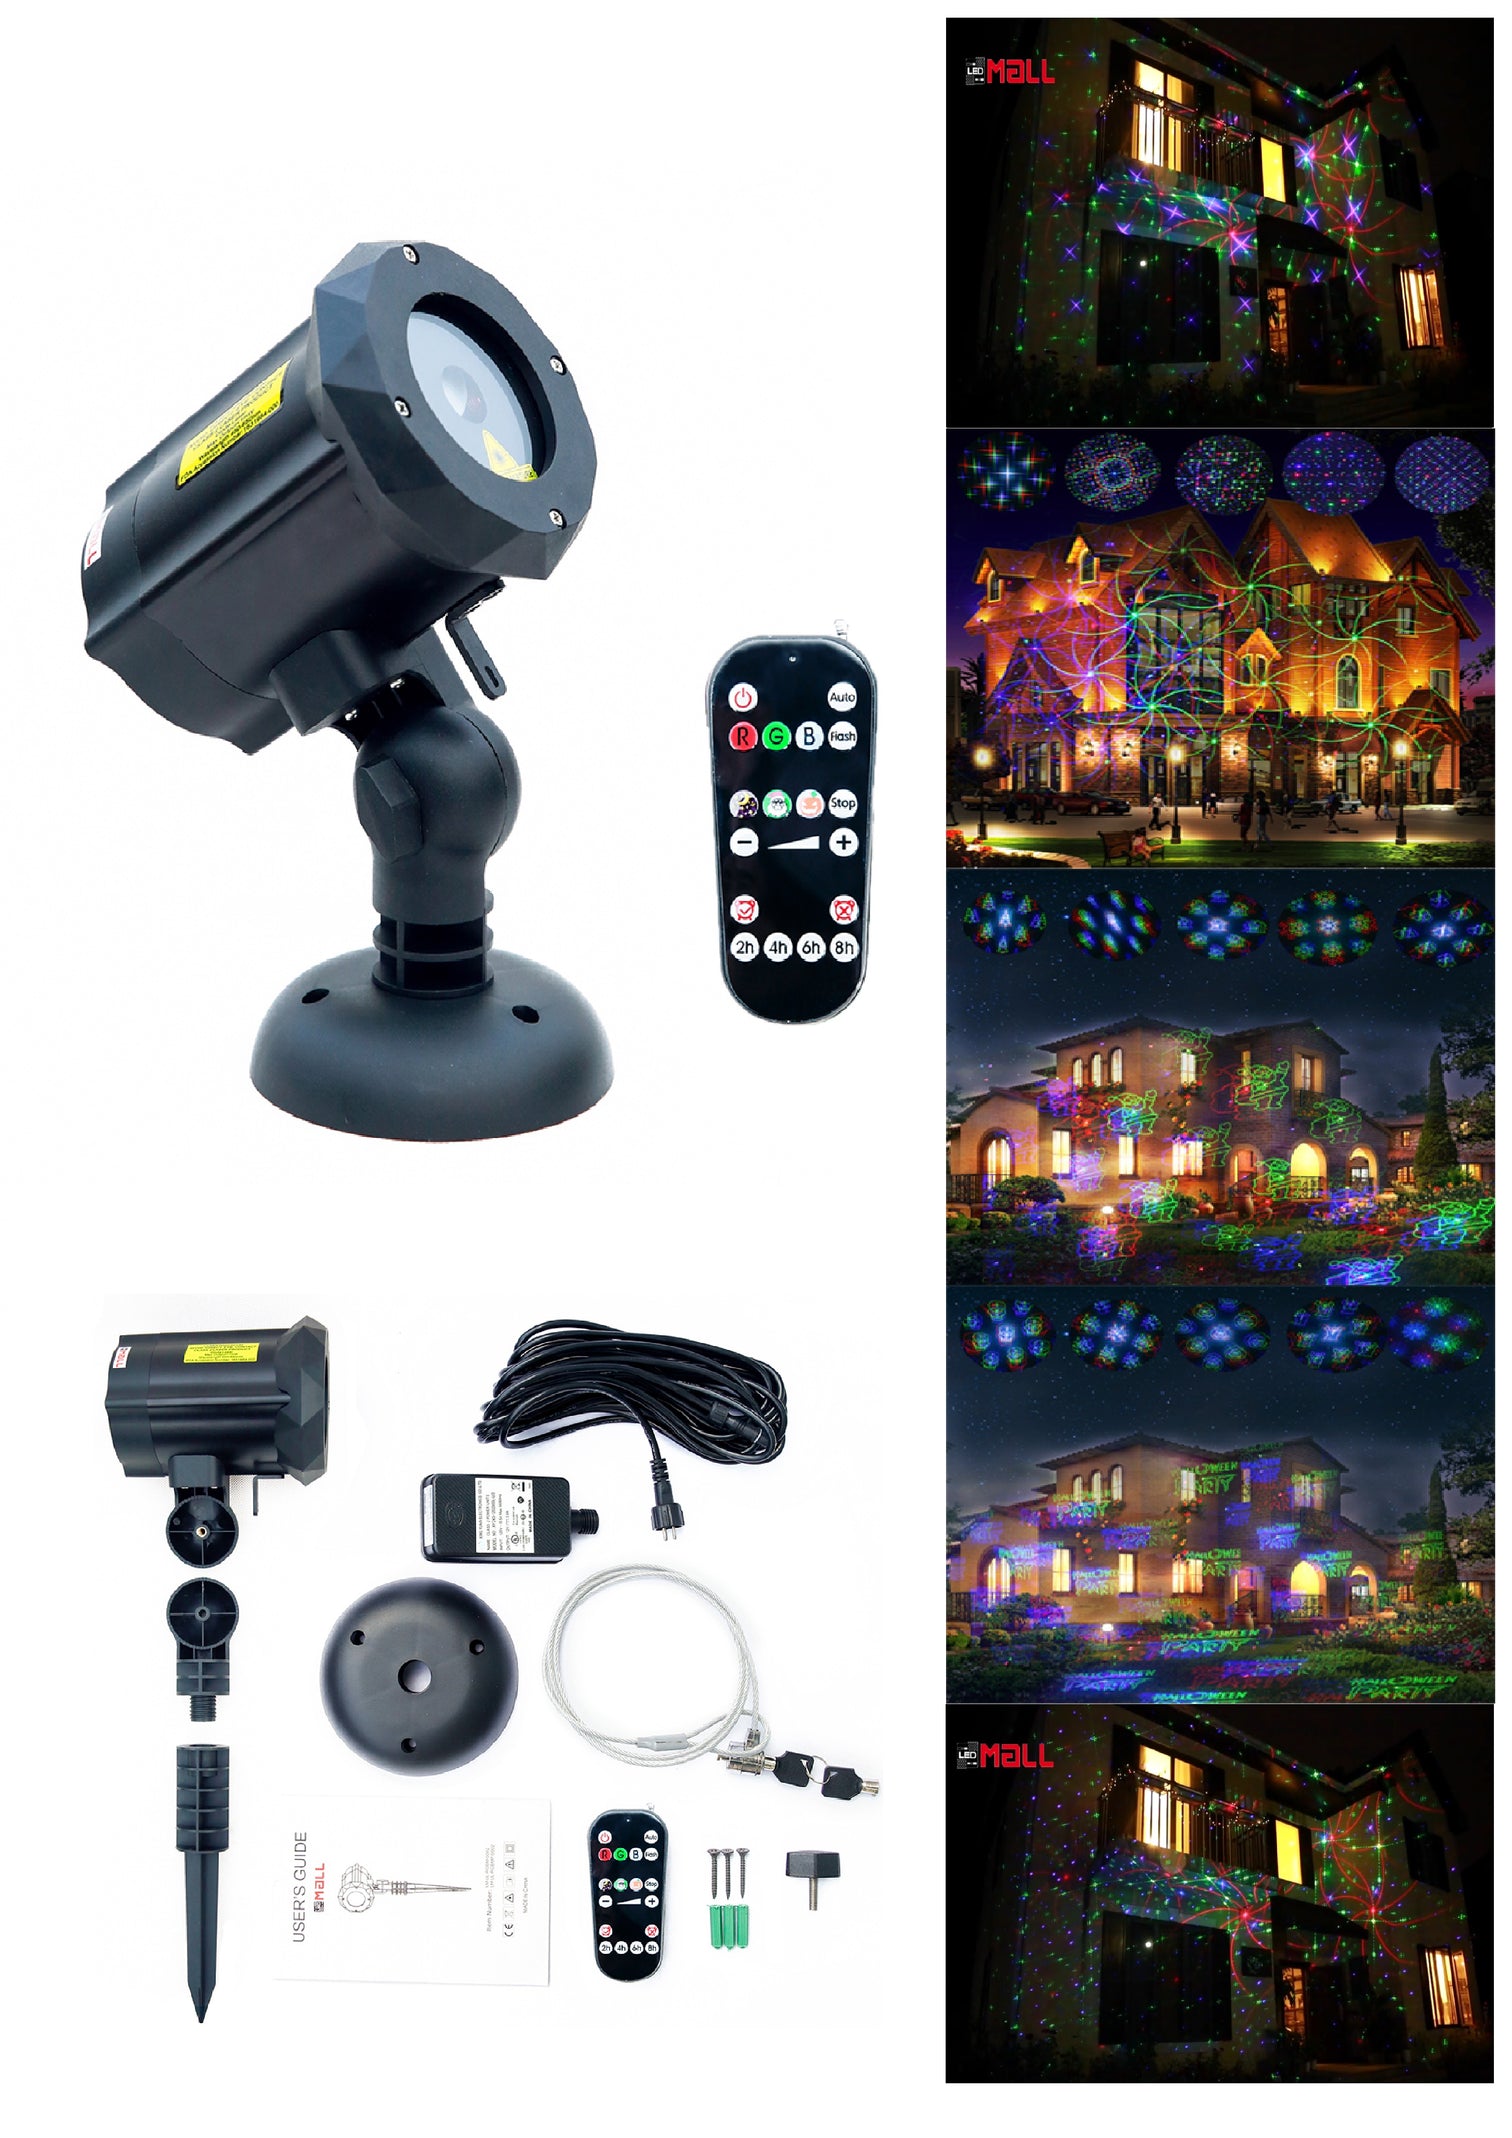 Motion Pattern 3 Models In 1 Continuous 18 Patterns Ledmall Rgb Outdoor Laser Garden And Christmas Lights